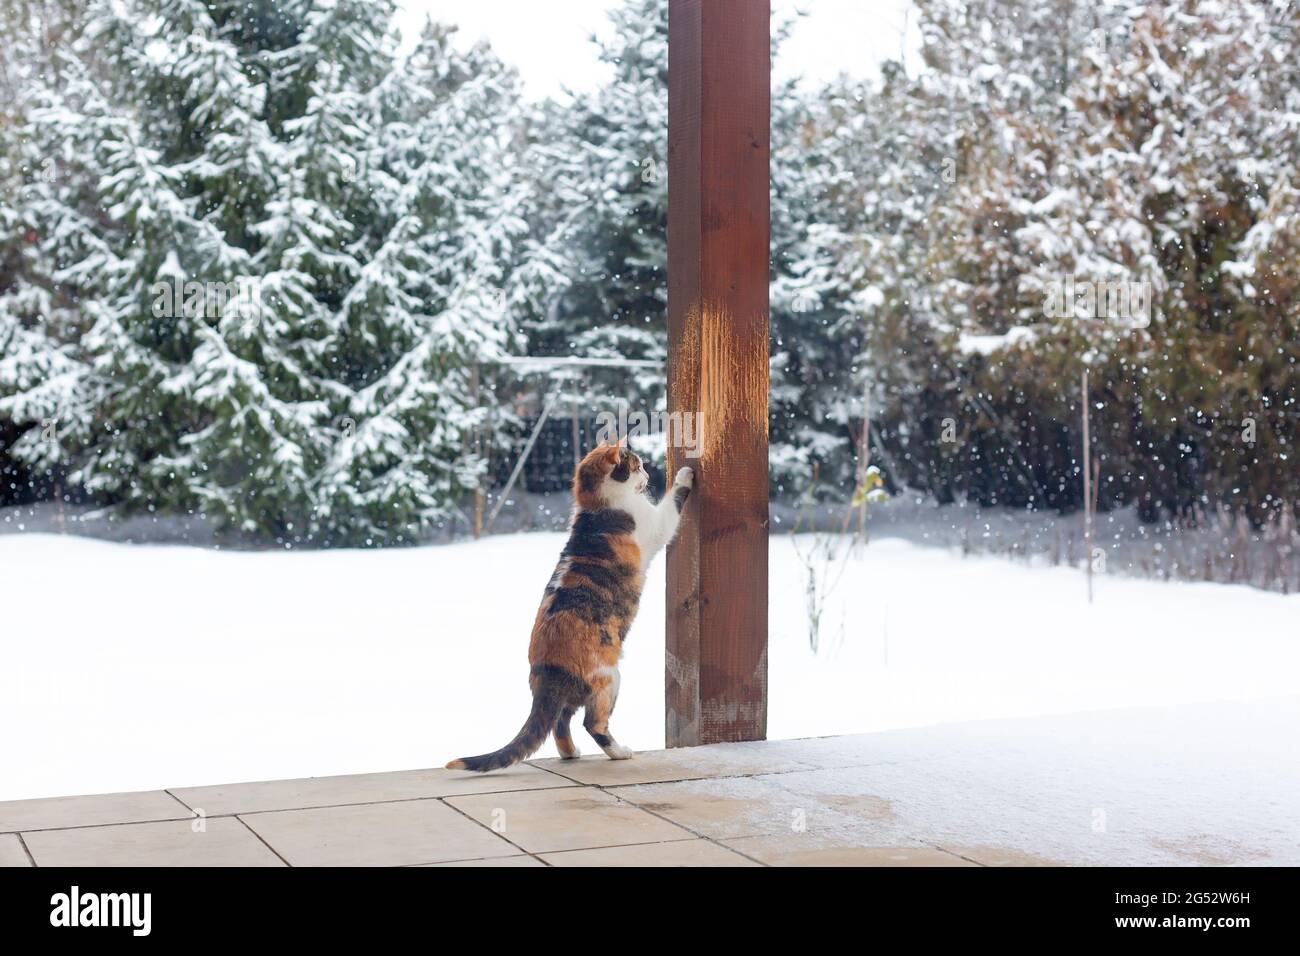 Calico cat sharpening its claws on wooden pillar of covered veranda. Snowy yard in the background Stock Photo